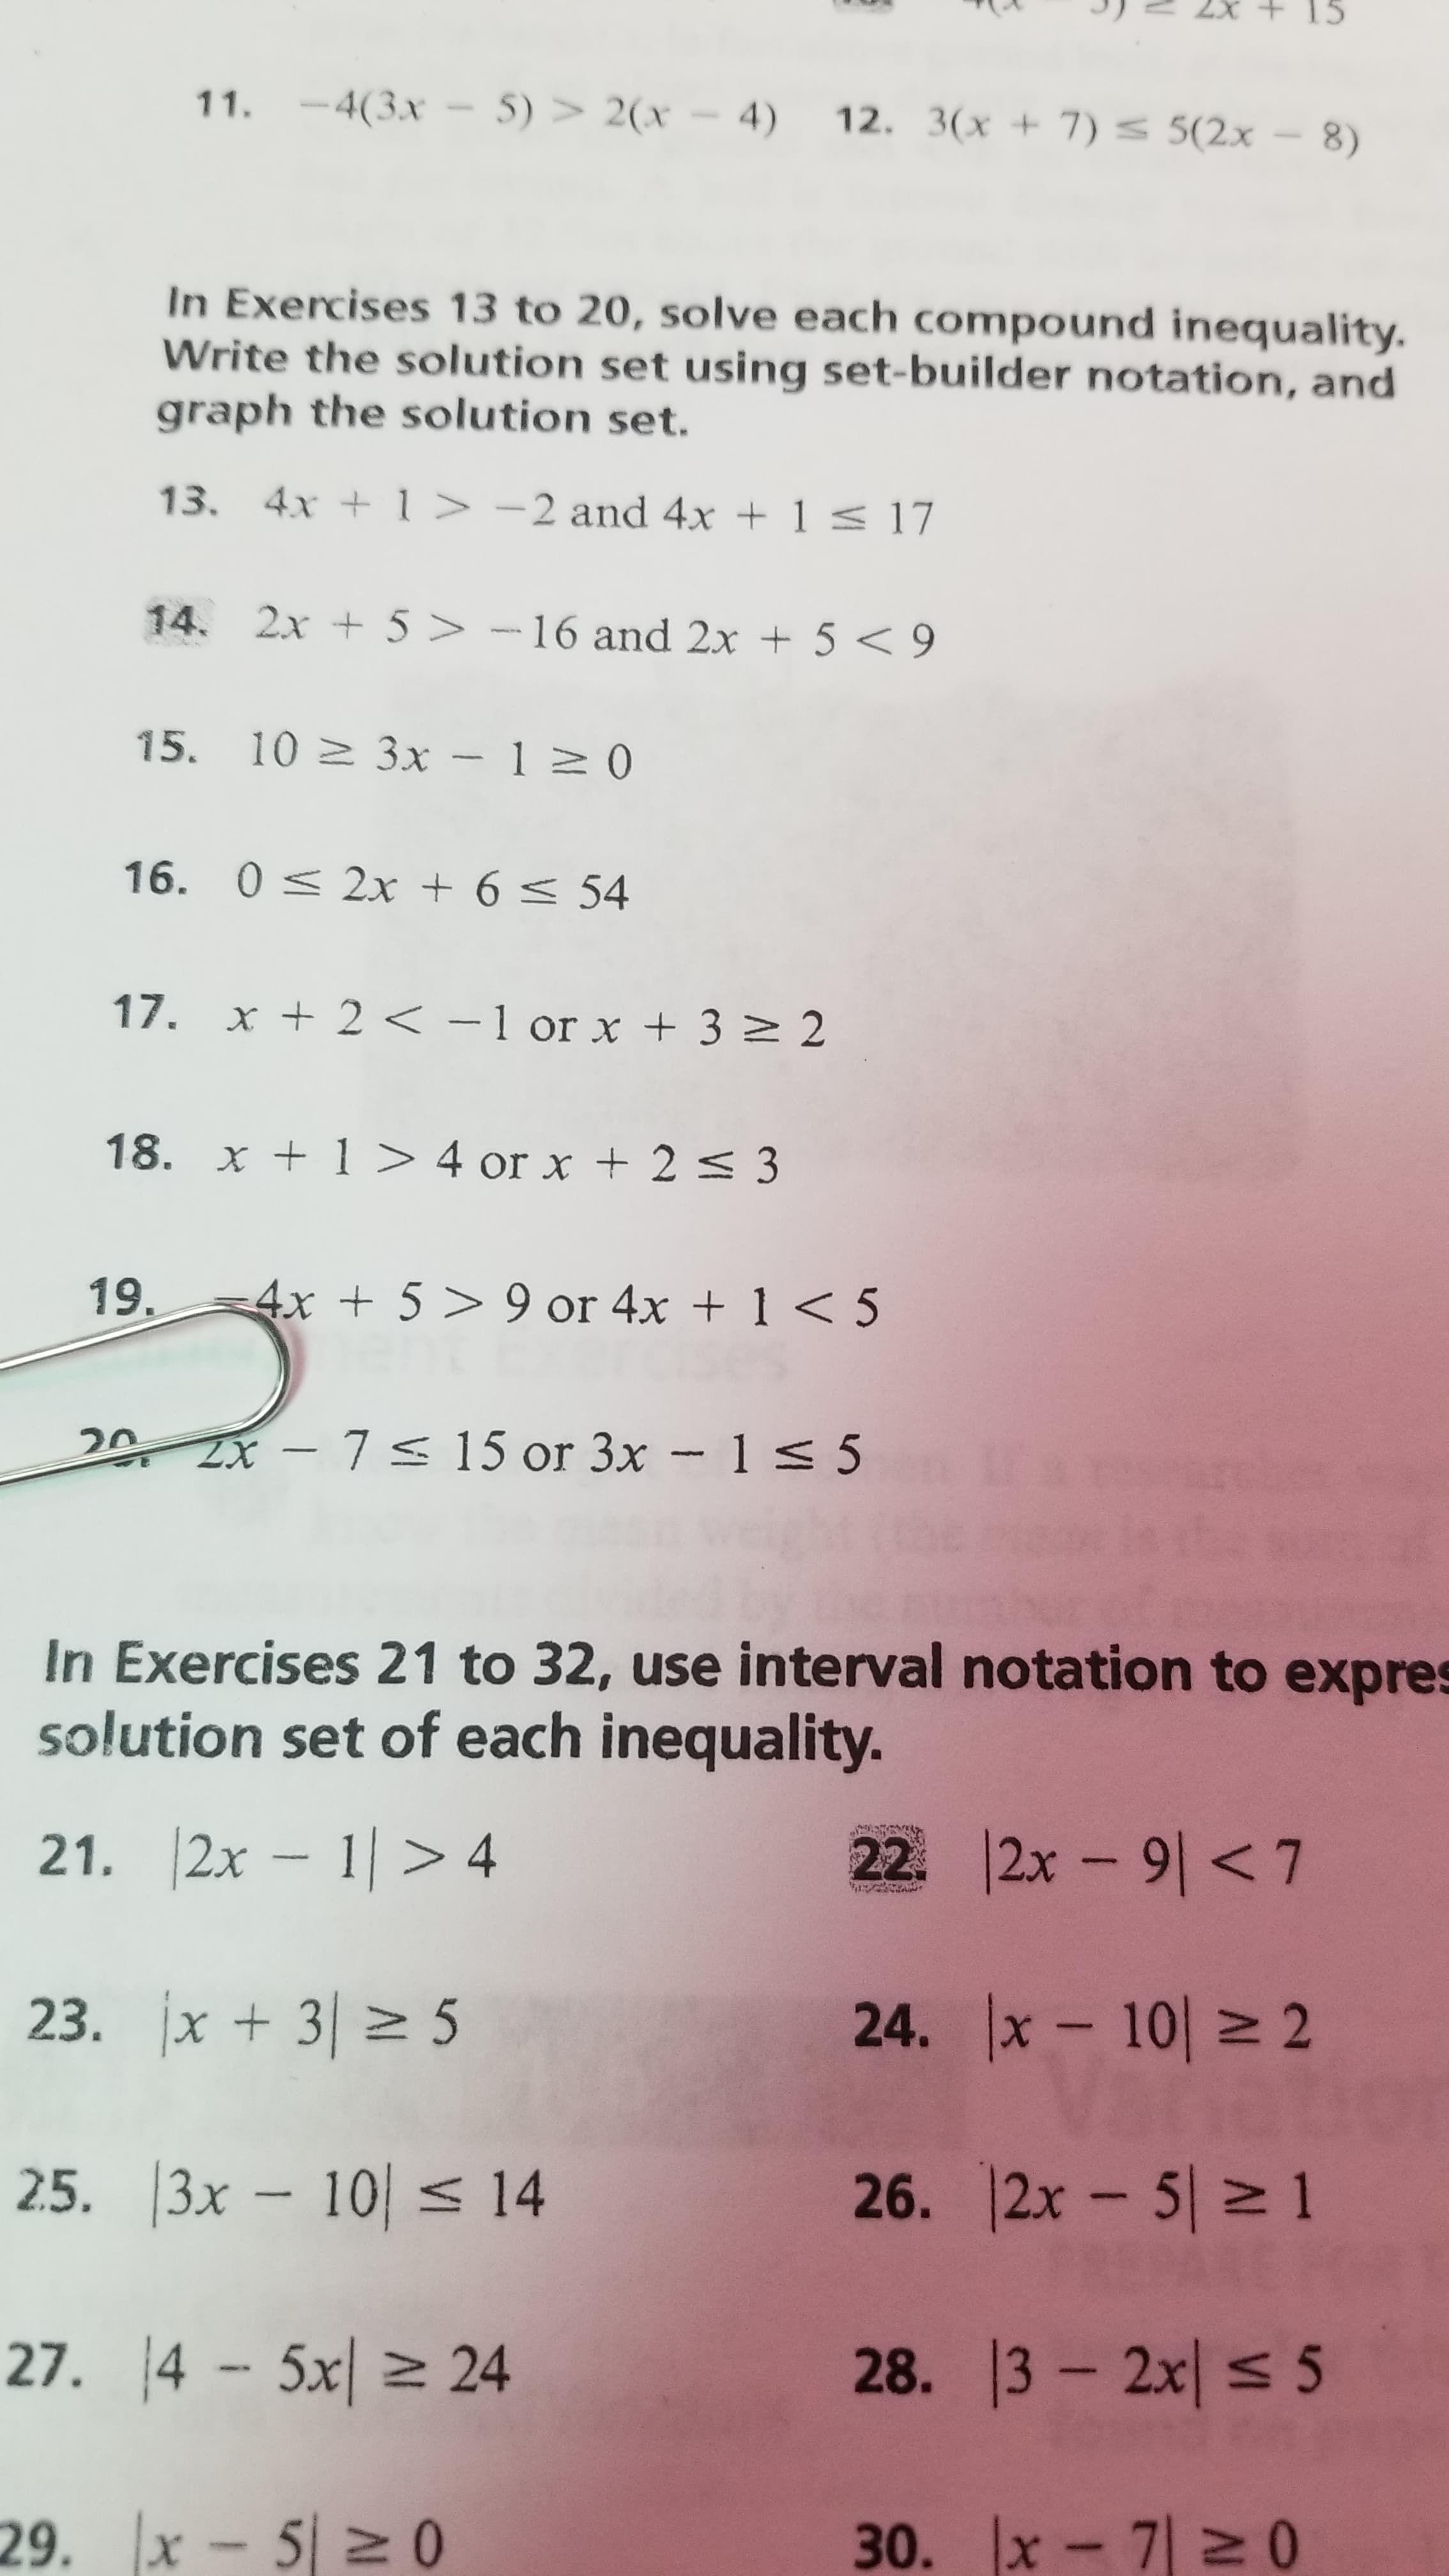 15
11. -4(3x - 5) > 2(x – 4)
12. 3(x + 7) 5(2x- 8)
In Exercises 13 to 20, solve each compound inequality.
Write the solution set using set-builder notation, and
graph the solution set.
13. 4x +1 > -2 and 4x + 1 < 17
14. 2x + 5 > -16 and 2x + 5 < 9
15. 10 3x - 120
16. 0 < 2x + 6 < 54
17. x + 2 < -1 or x + 3 2 2
18. x + 1 > 4 or x + 2 < 3
19.
-4x + 5 > 9 or 4x + 1 < 5
20 2X - 7s 15 or 3x – 1 < 5
In Exercises 21 to 32, use interval notation to expres
solution set of each inequality.
21. |2x – 1| > 4
22. 2x - 9|<7
23. jx + 3| 5
24. x - 10| 2
tietio
26. 12x- 5 1
2.5. 3x – 10| < 14
27. 4 - 5x| > 24
28. 13 2x < 5
29. x- 5 2 0
30. Ix-기2 0
